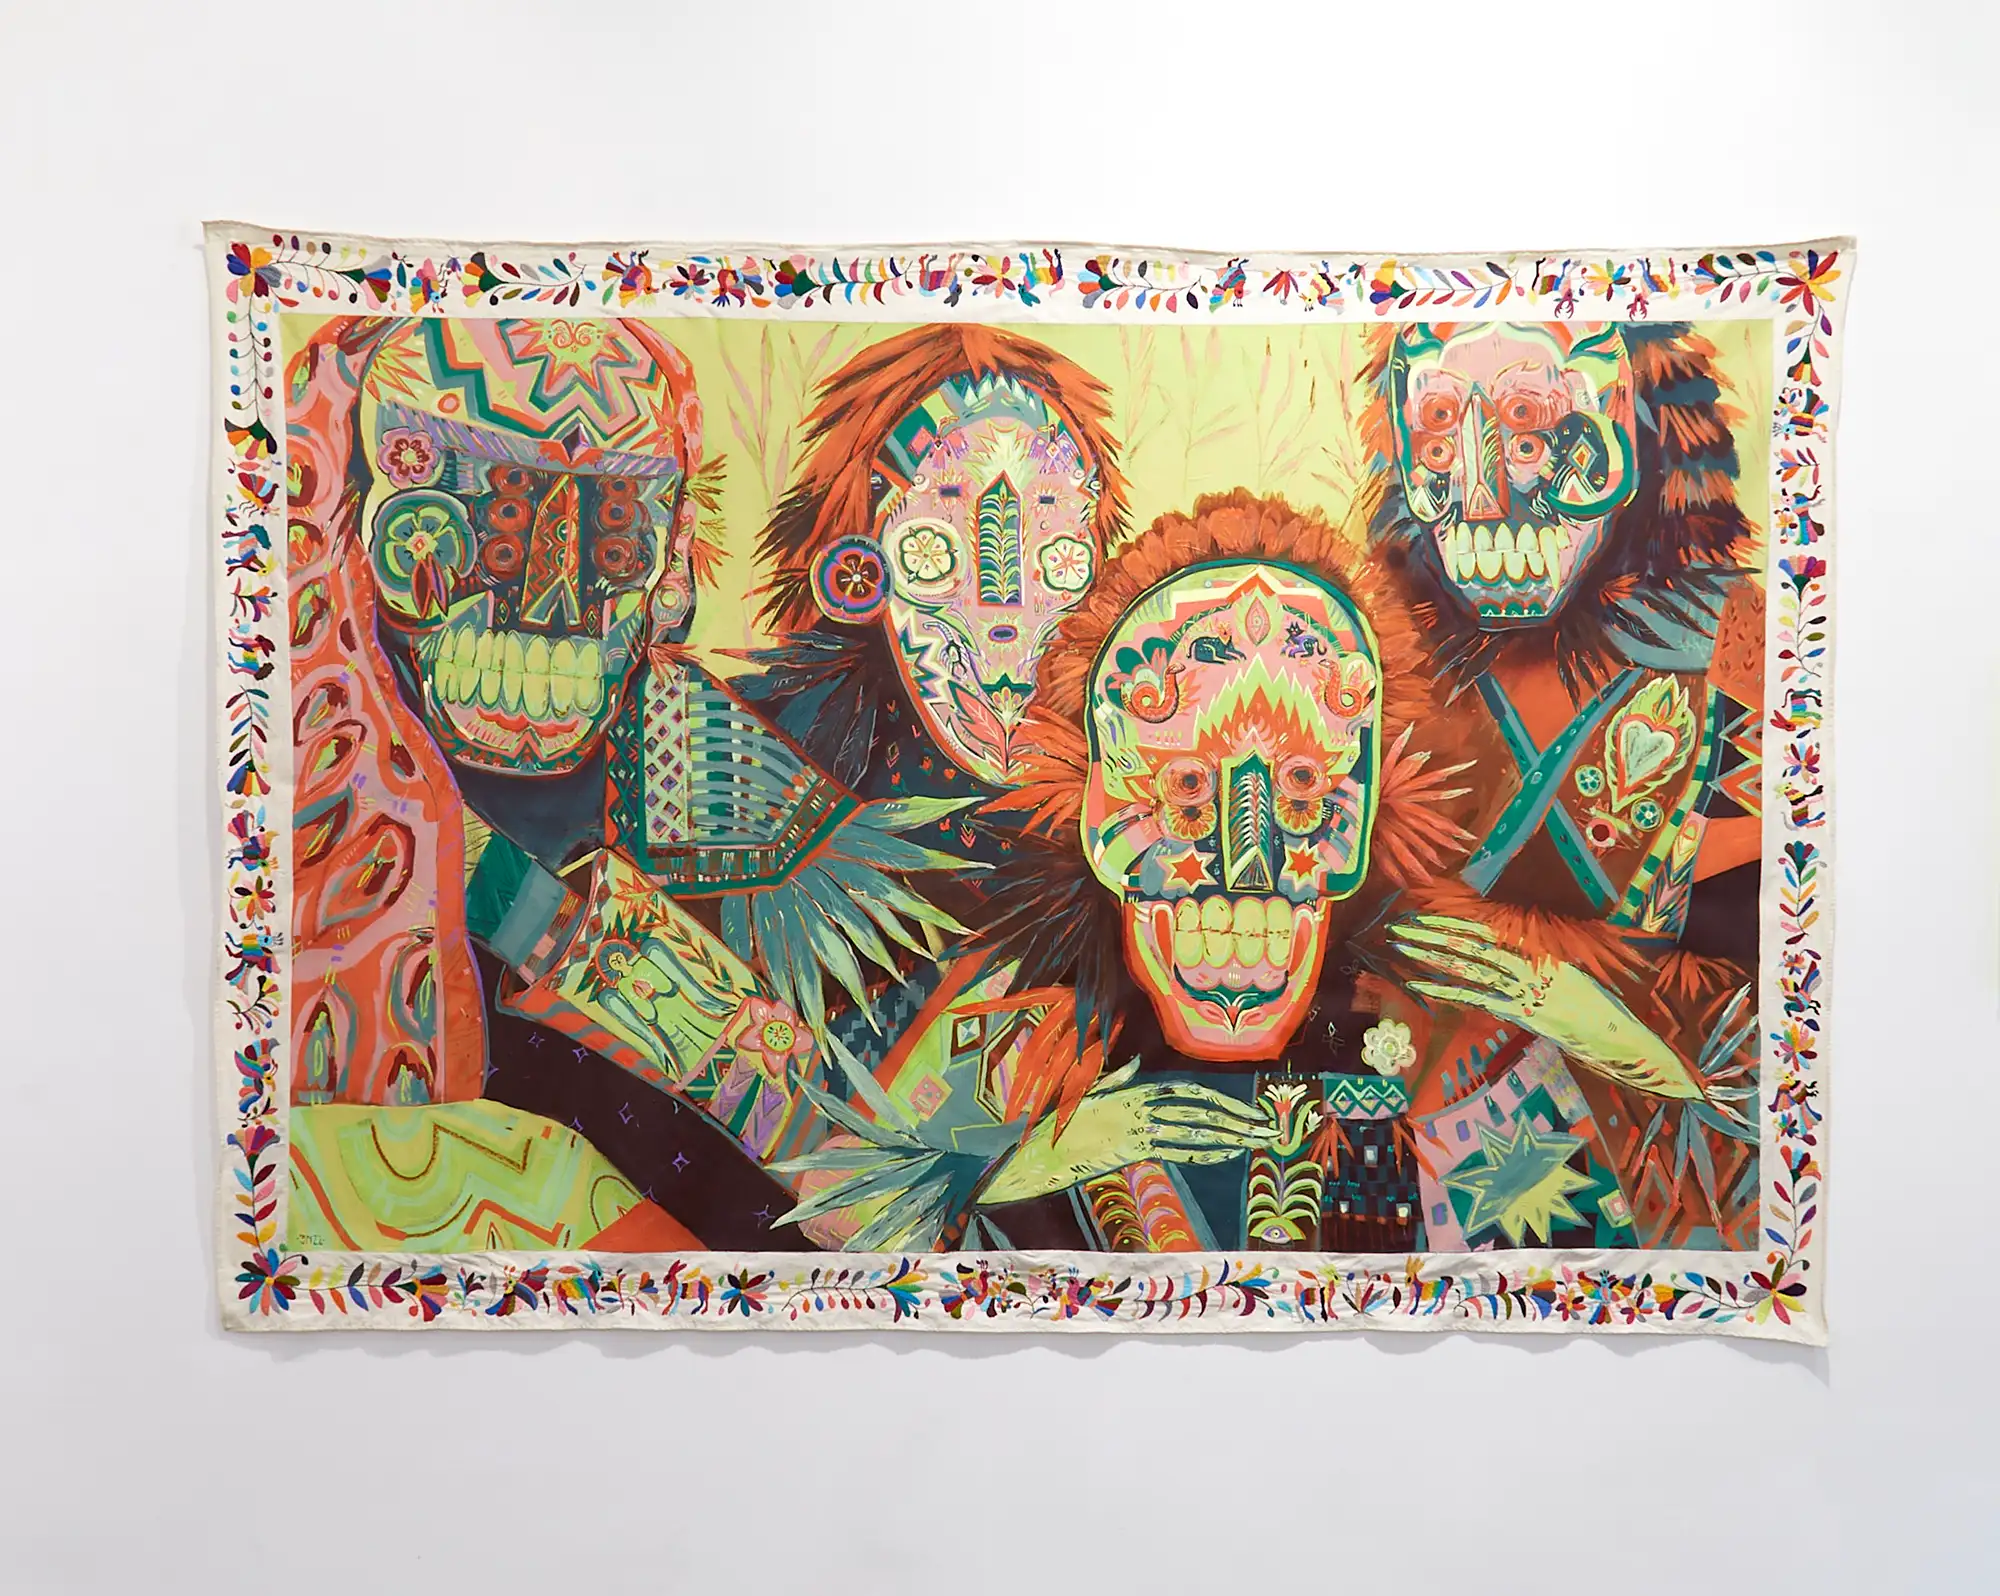 jumu monster, painting, mommsen35 gallery, colorful indigenous painting with masks